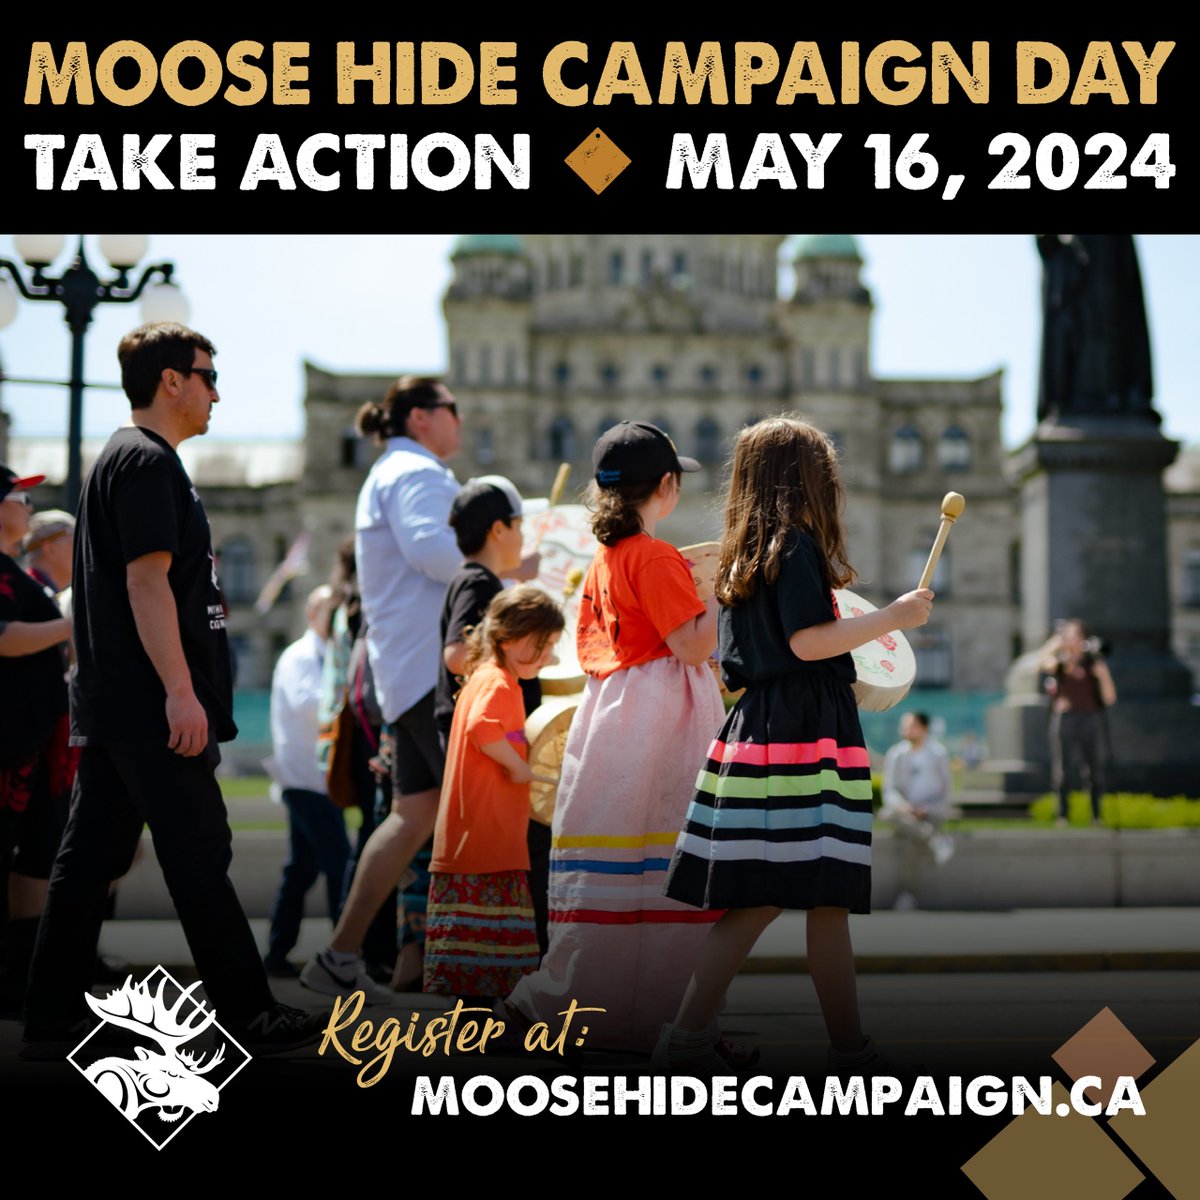 #MooseHideCampaignDay is tomorrow! Many #EIPS schools are recognizing the campaign this week or next week because of the May long weekend. Learn more from @Moose_Hide. #FastToEndViolence #MooseHideMomentum